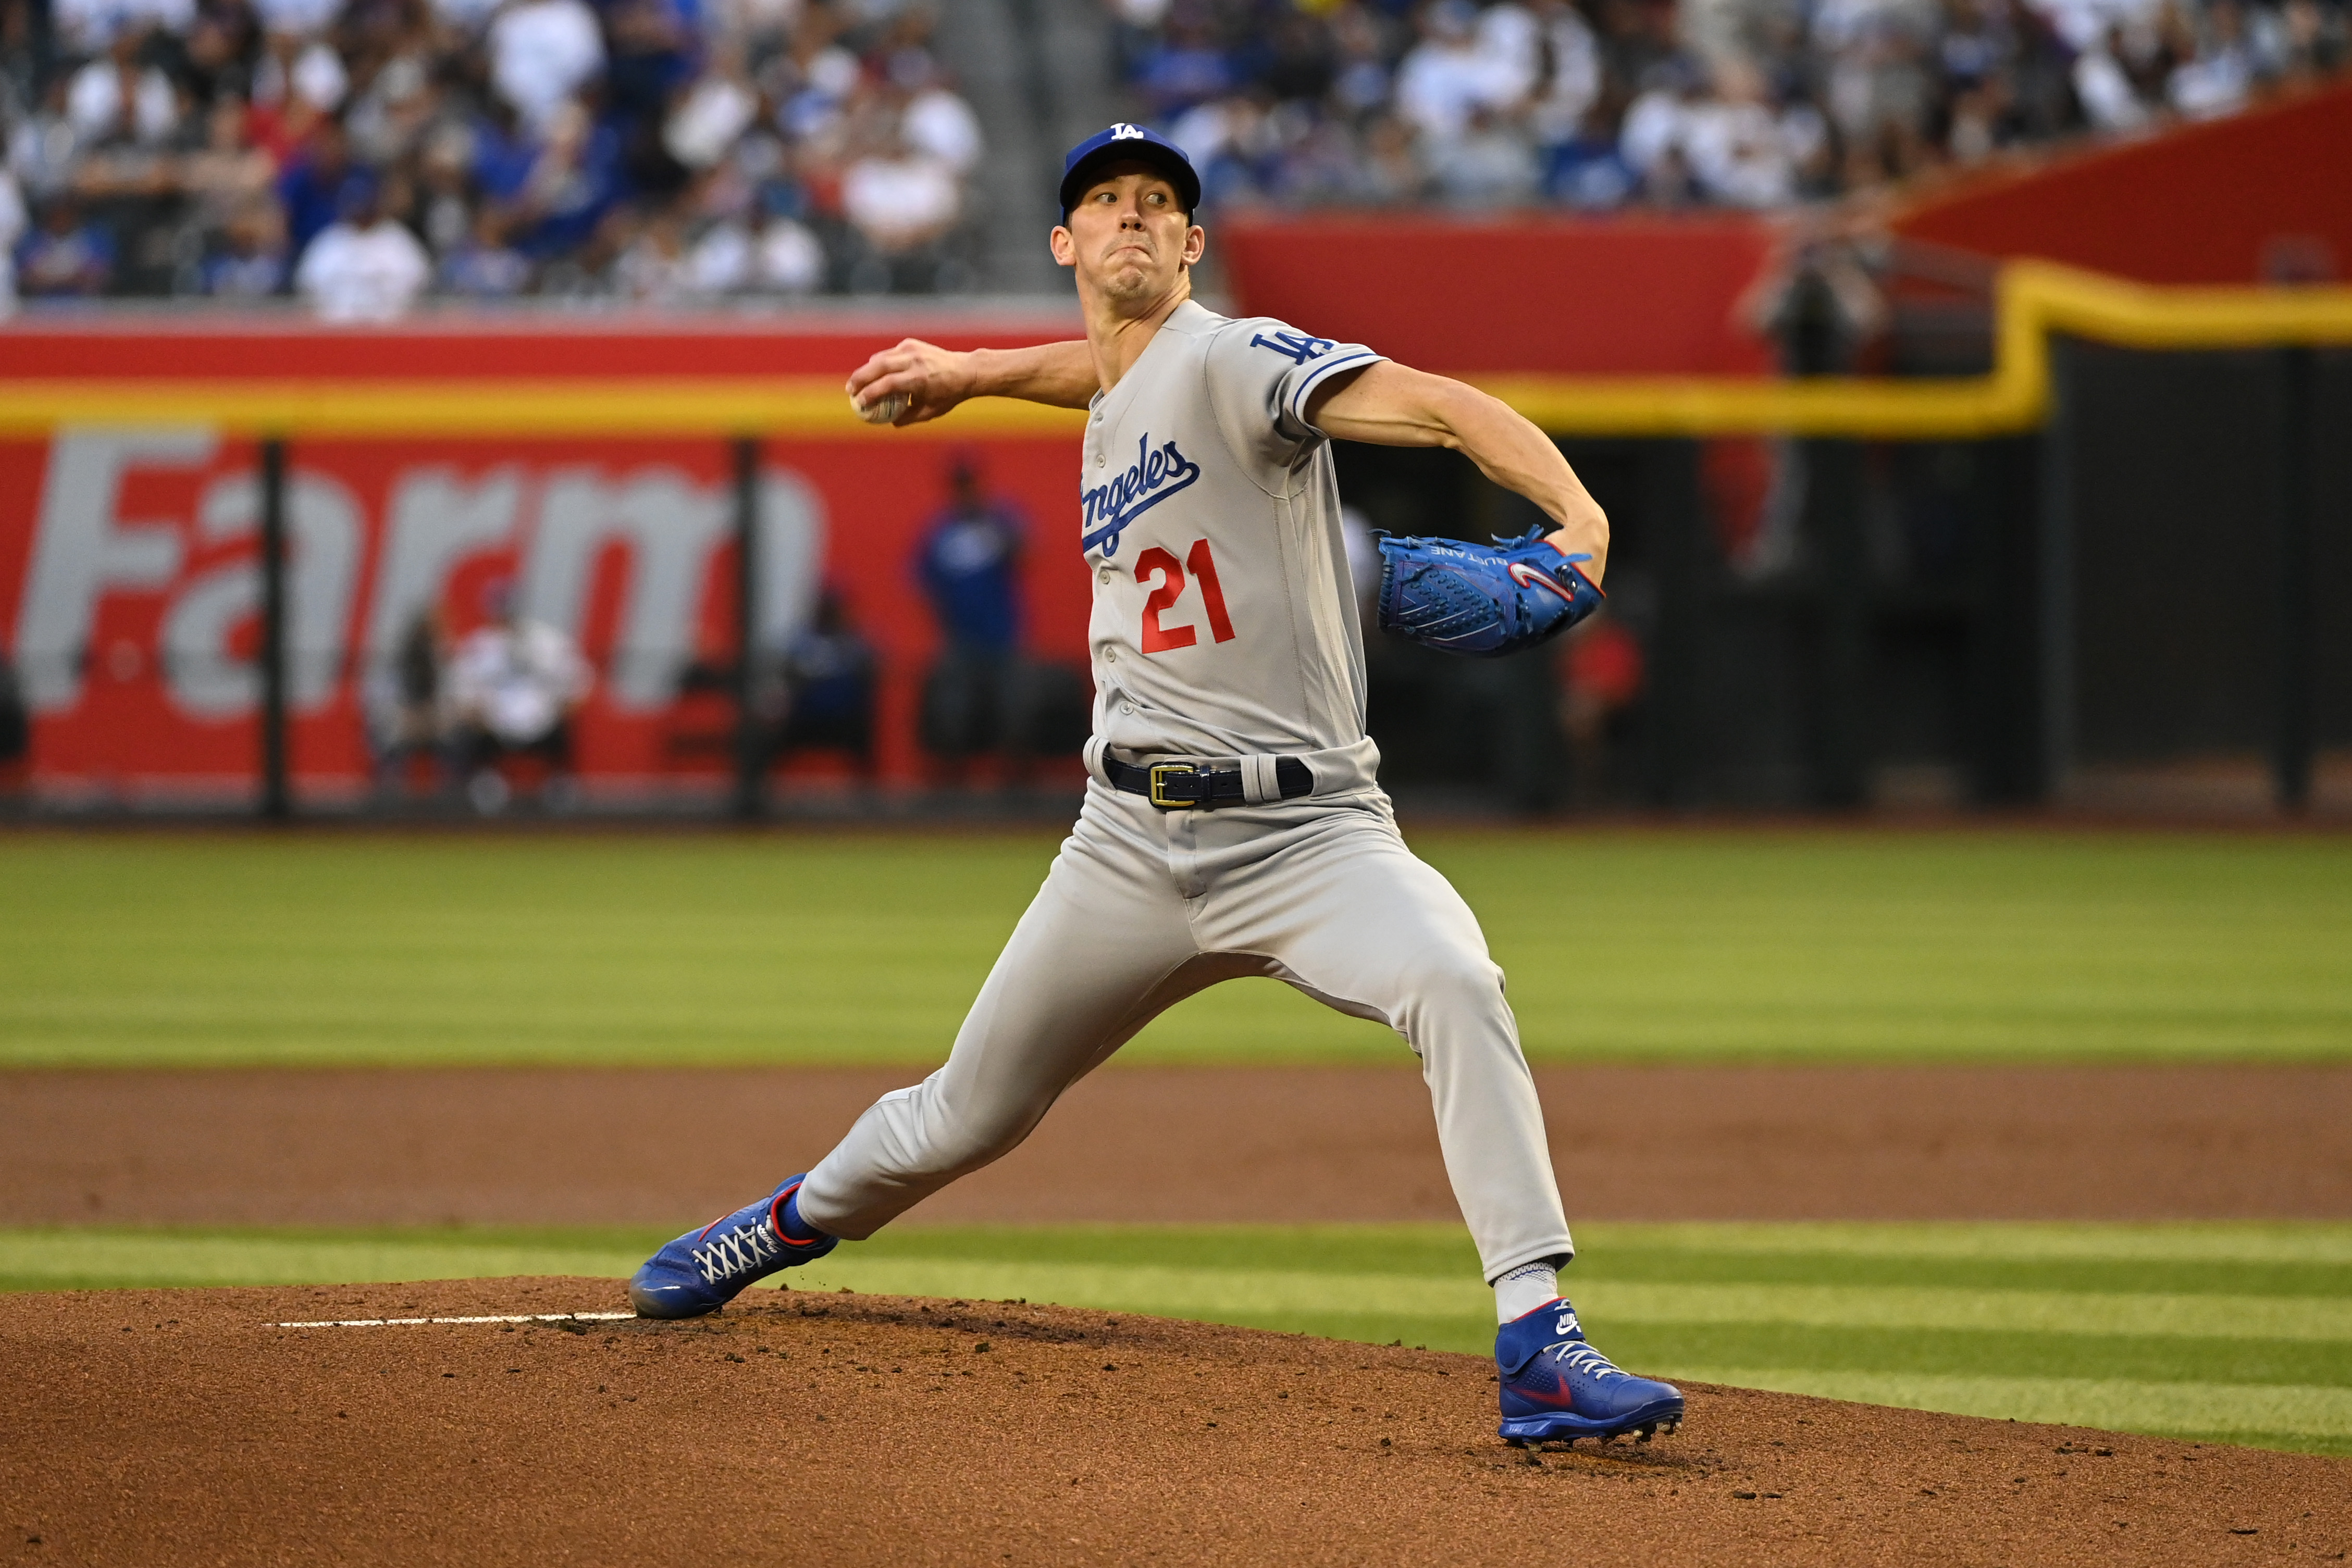 Walker Buehler strikes out 15 in complete game